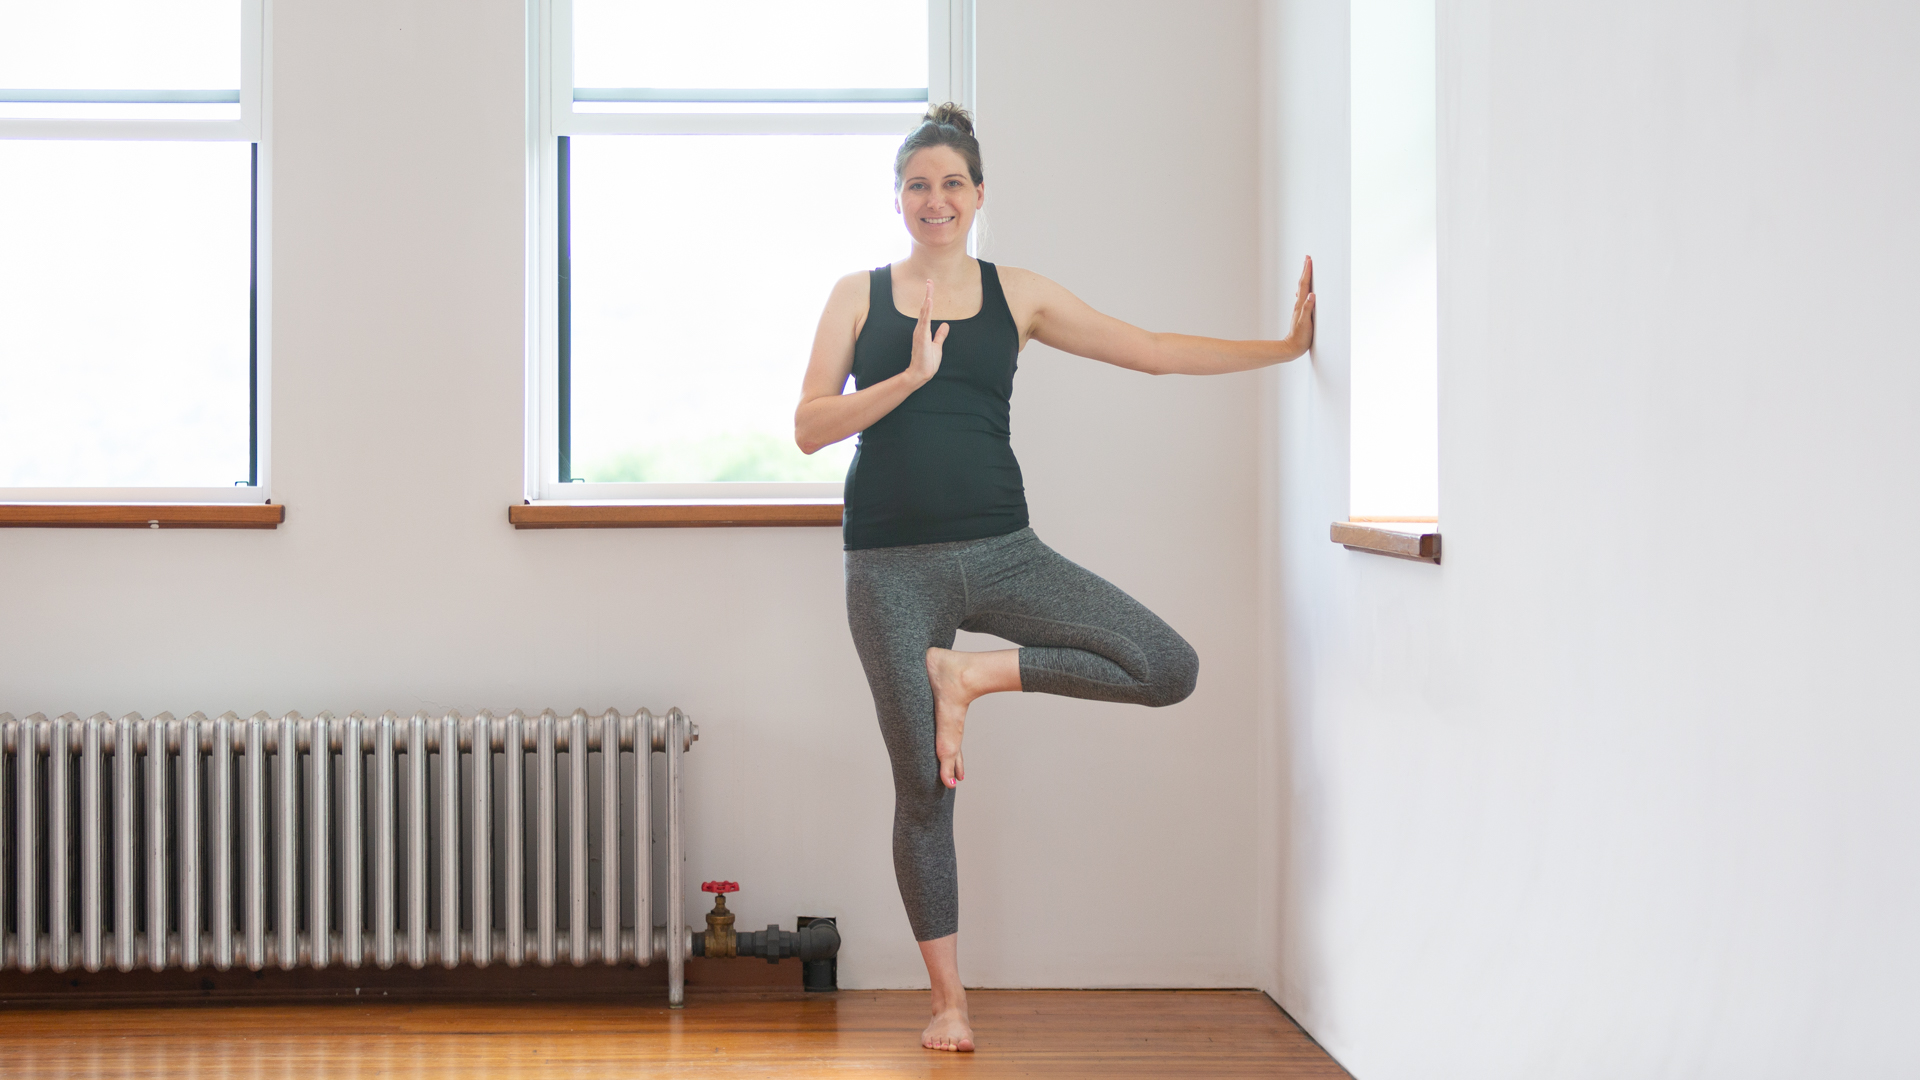 Prenatal Yoga Poses for Strength and Soothing, Every Trimester